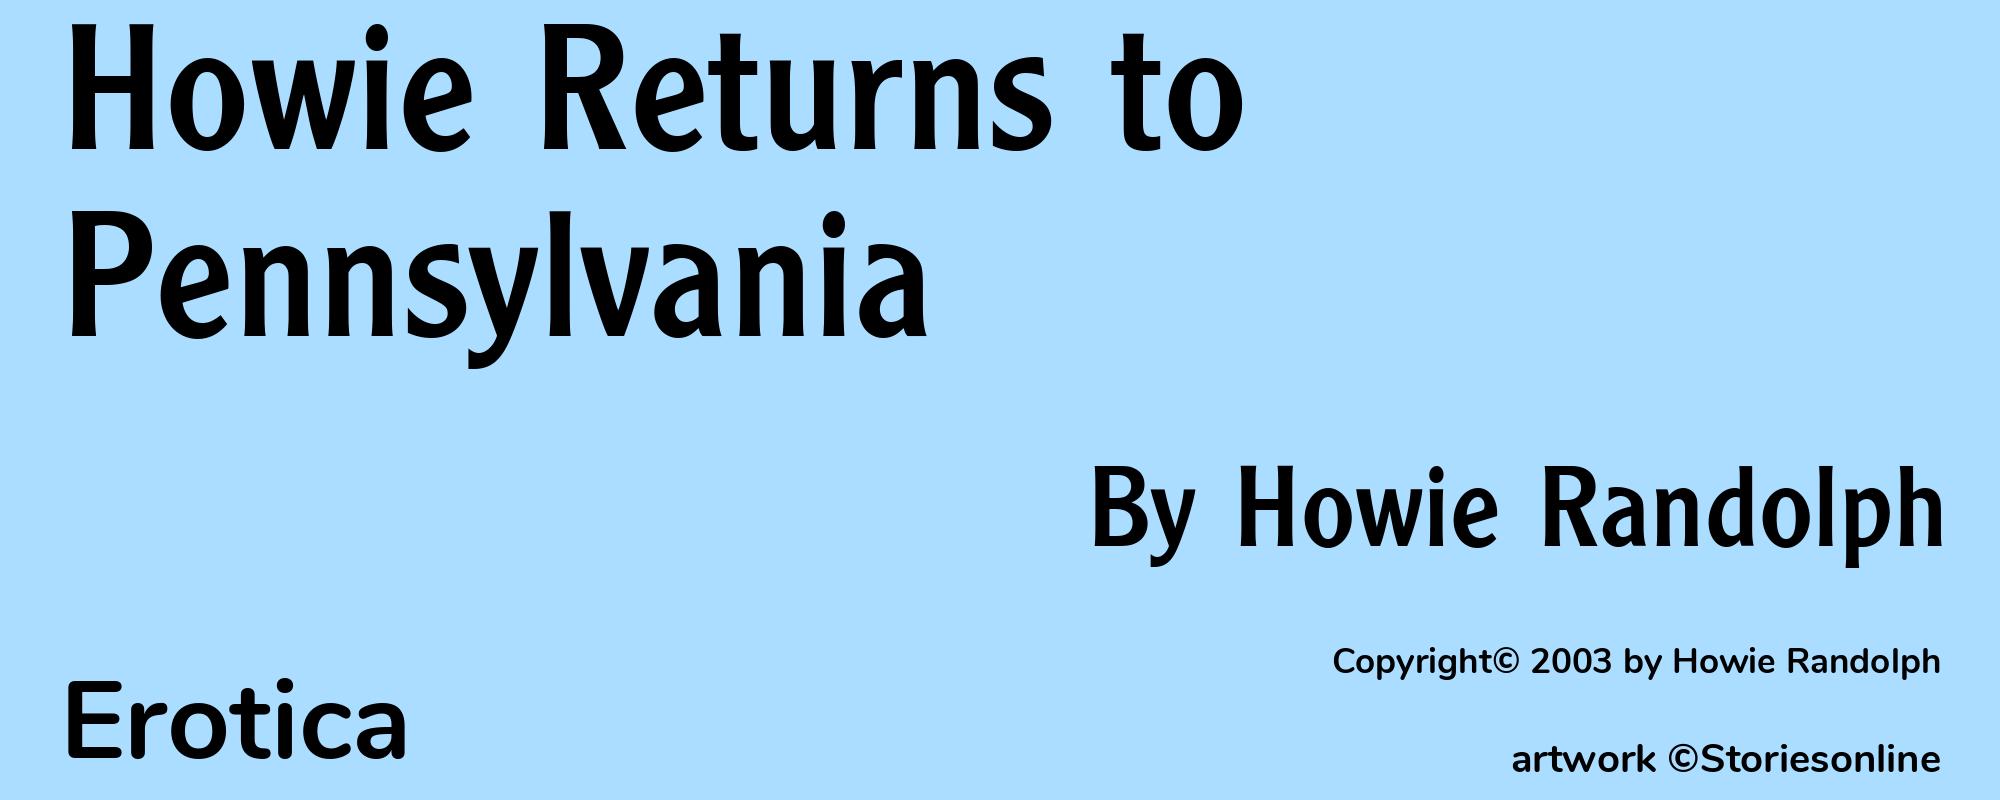 Howie Returns to Pennsylvania - Cover